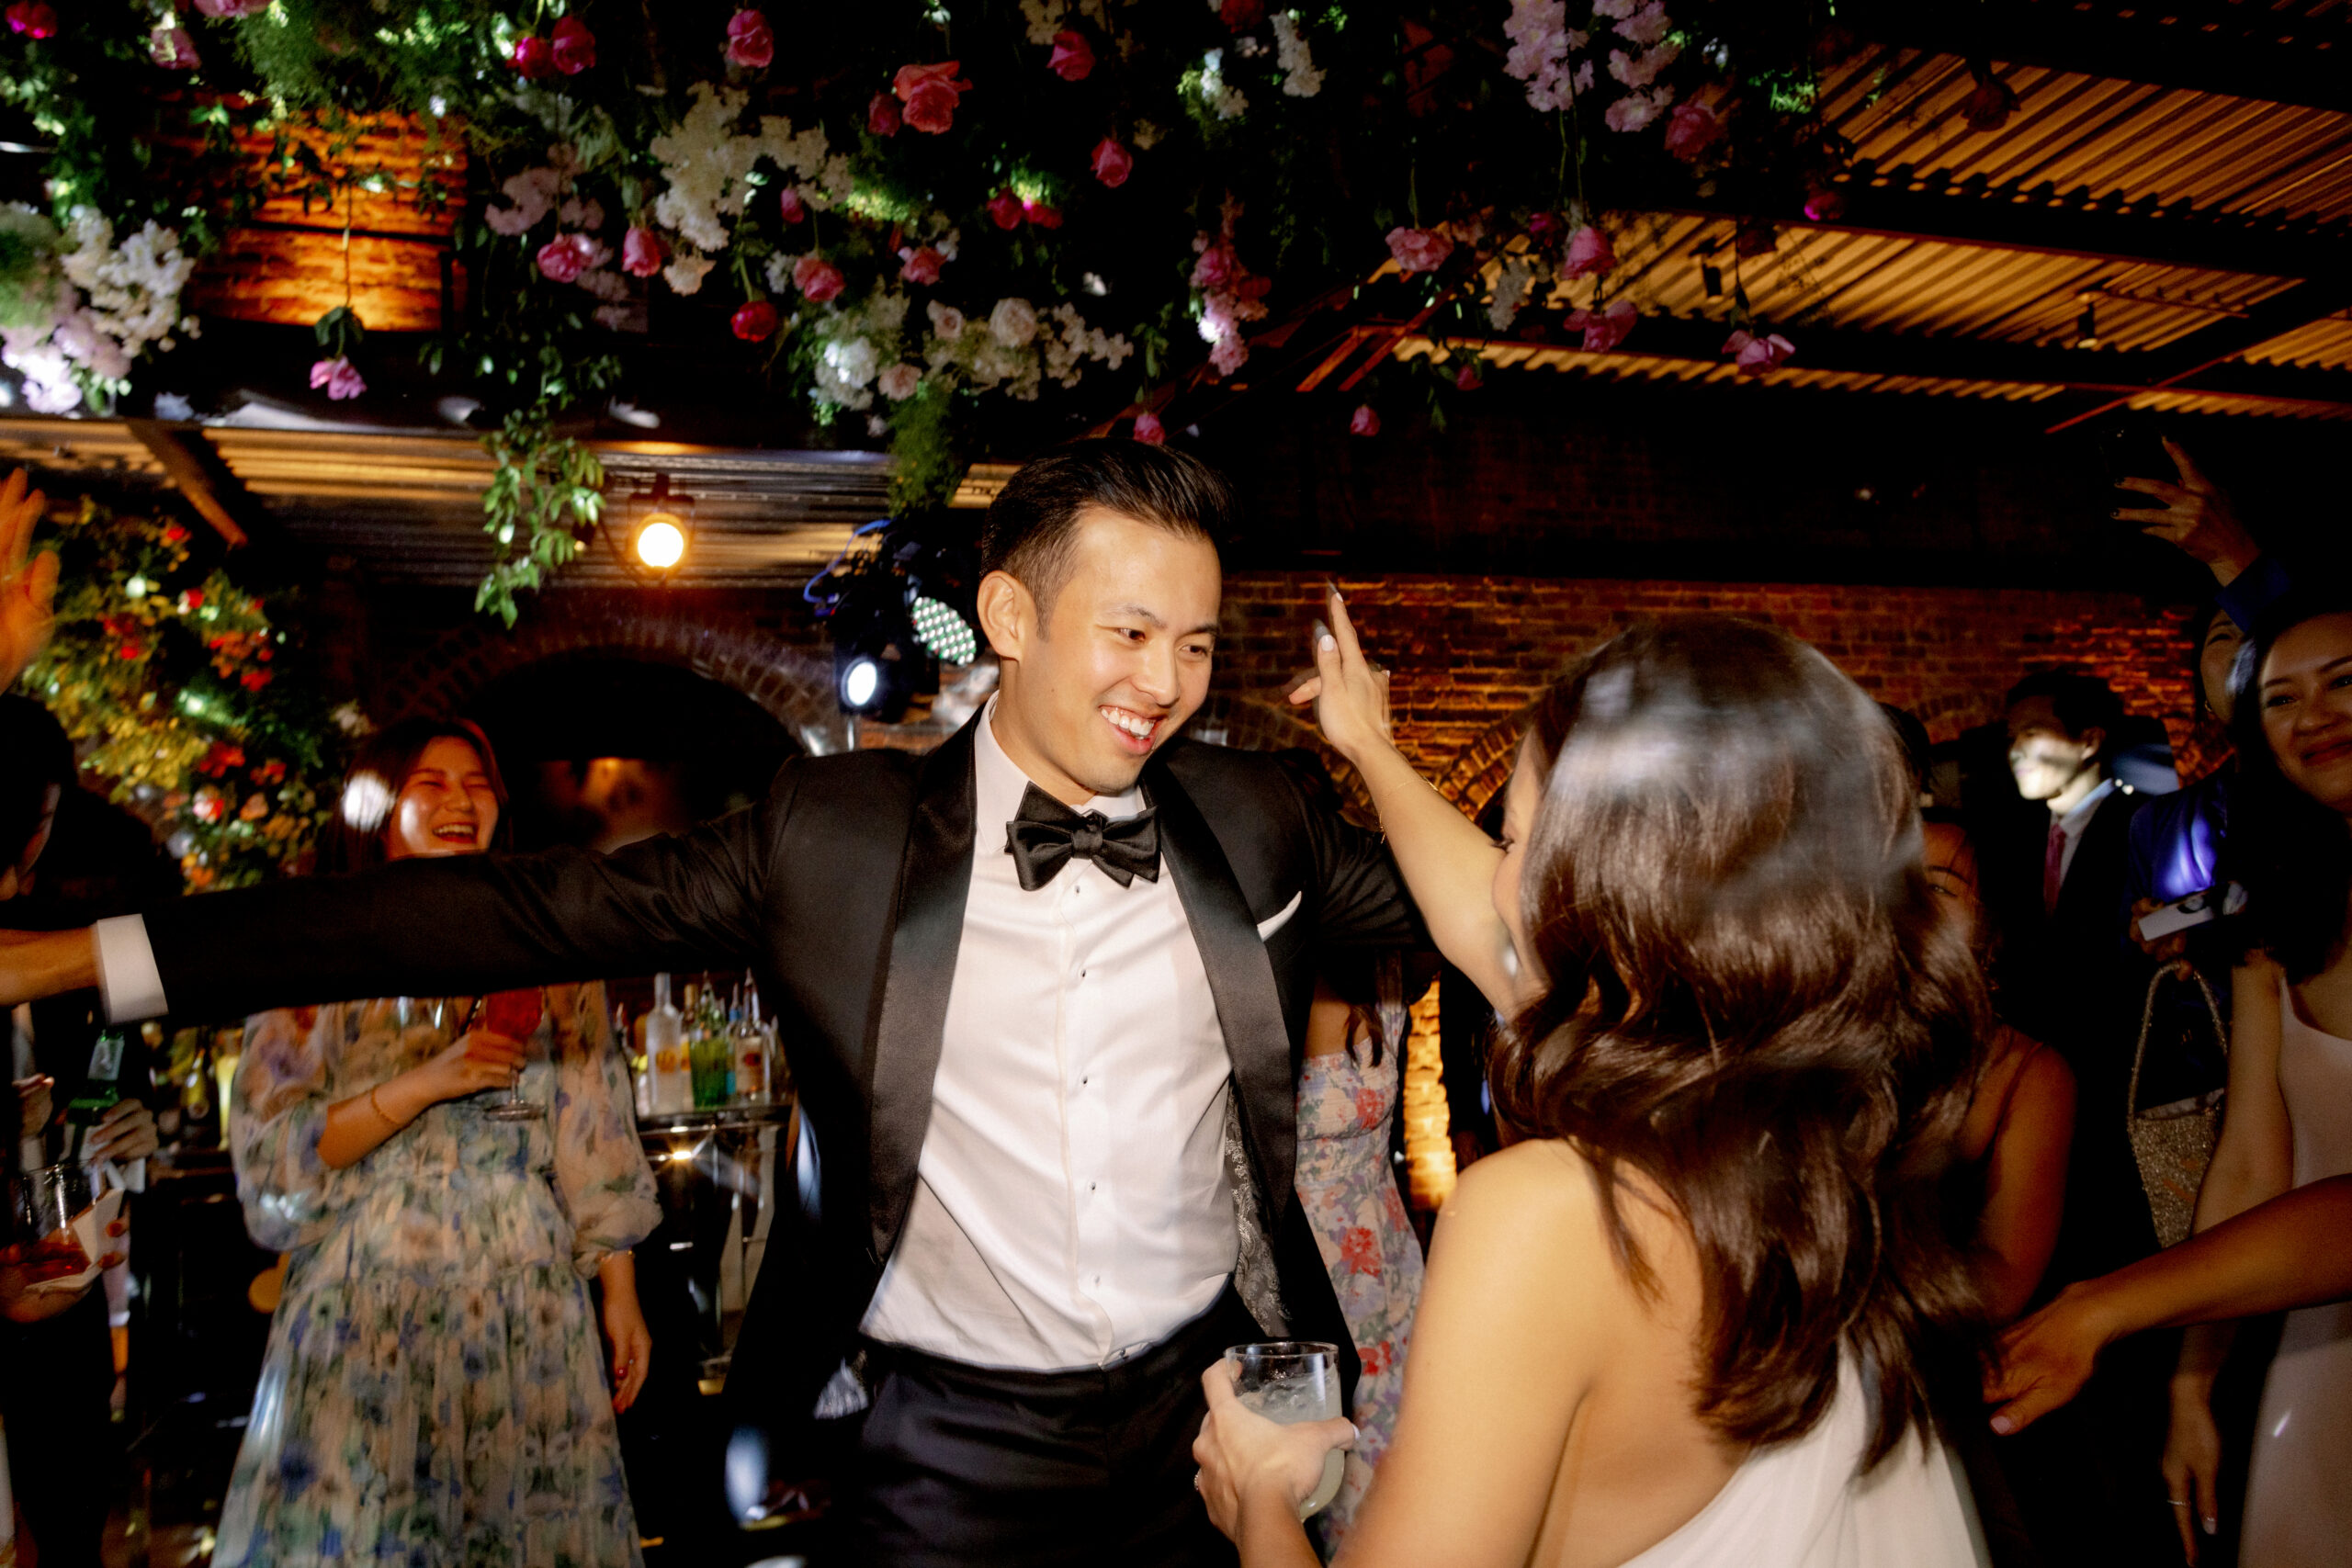 The newlyweds are happily dancing the night away. Image by Jenny Fu Studio